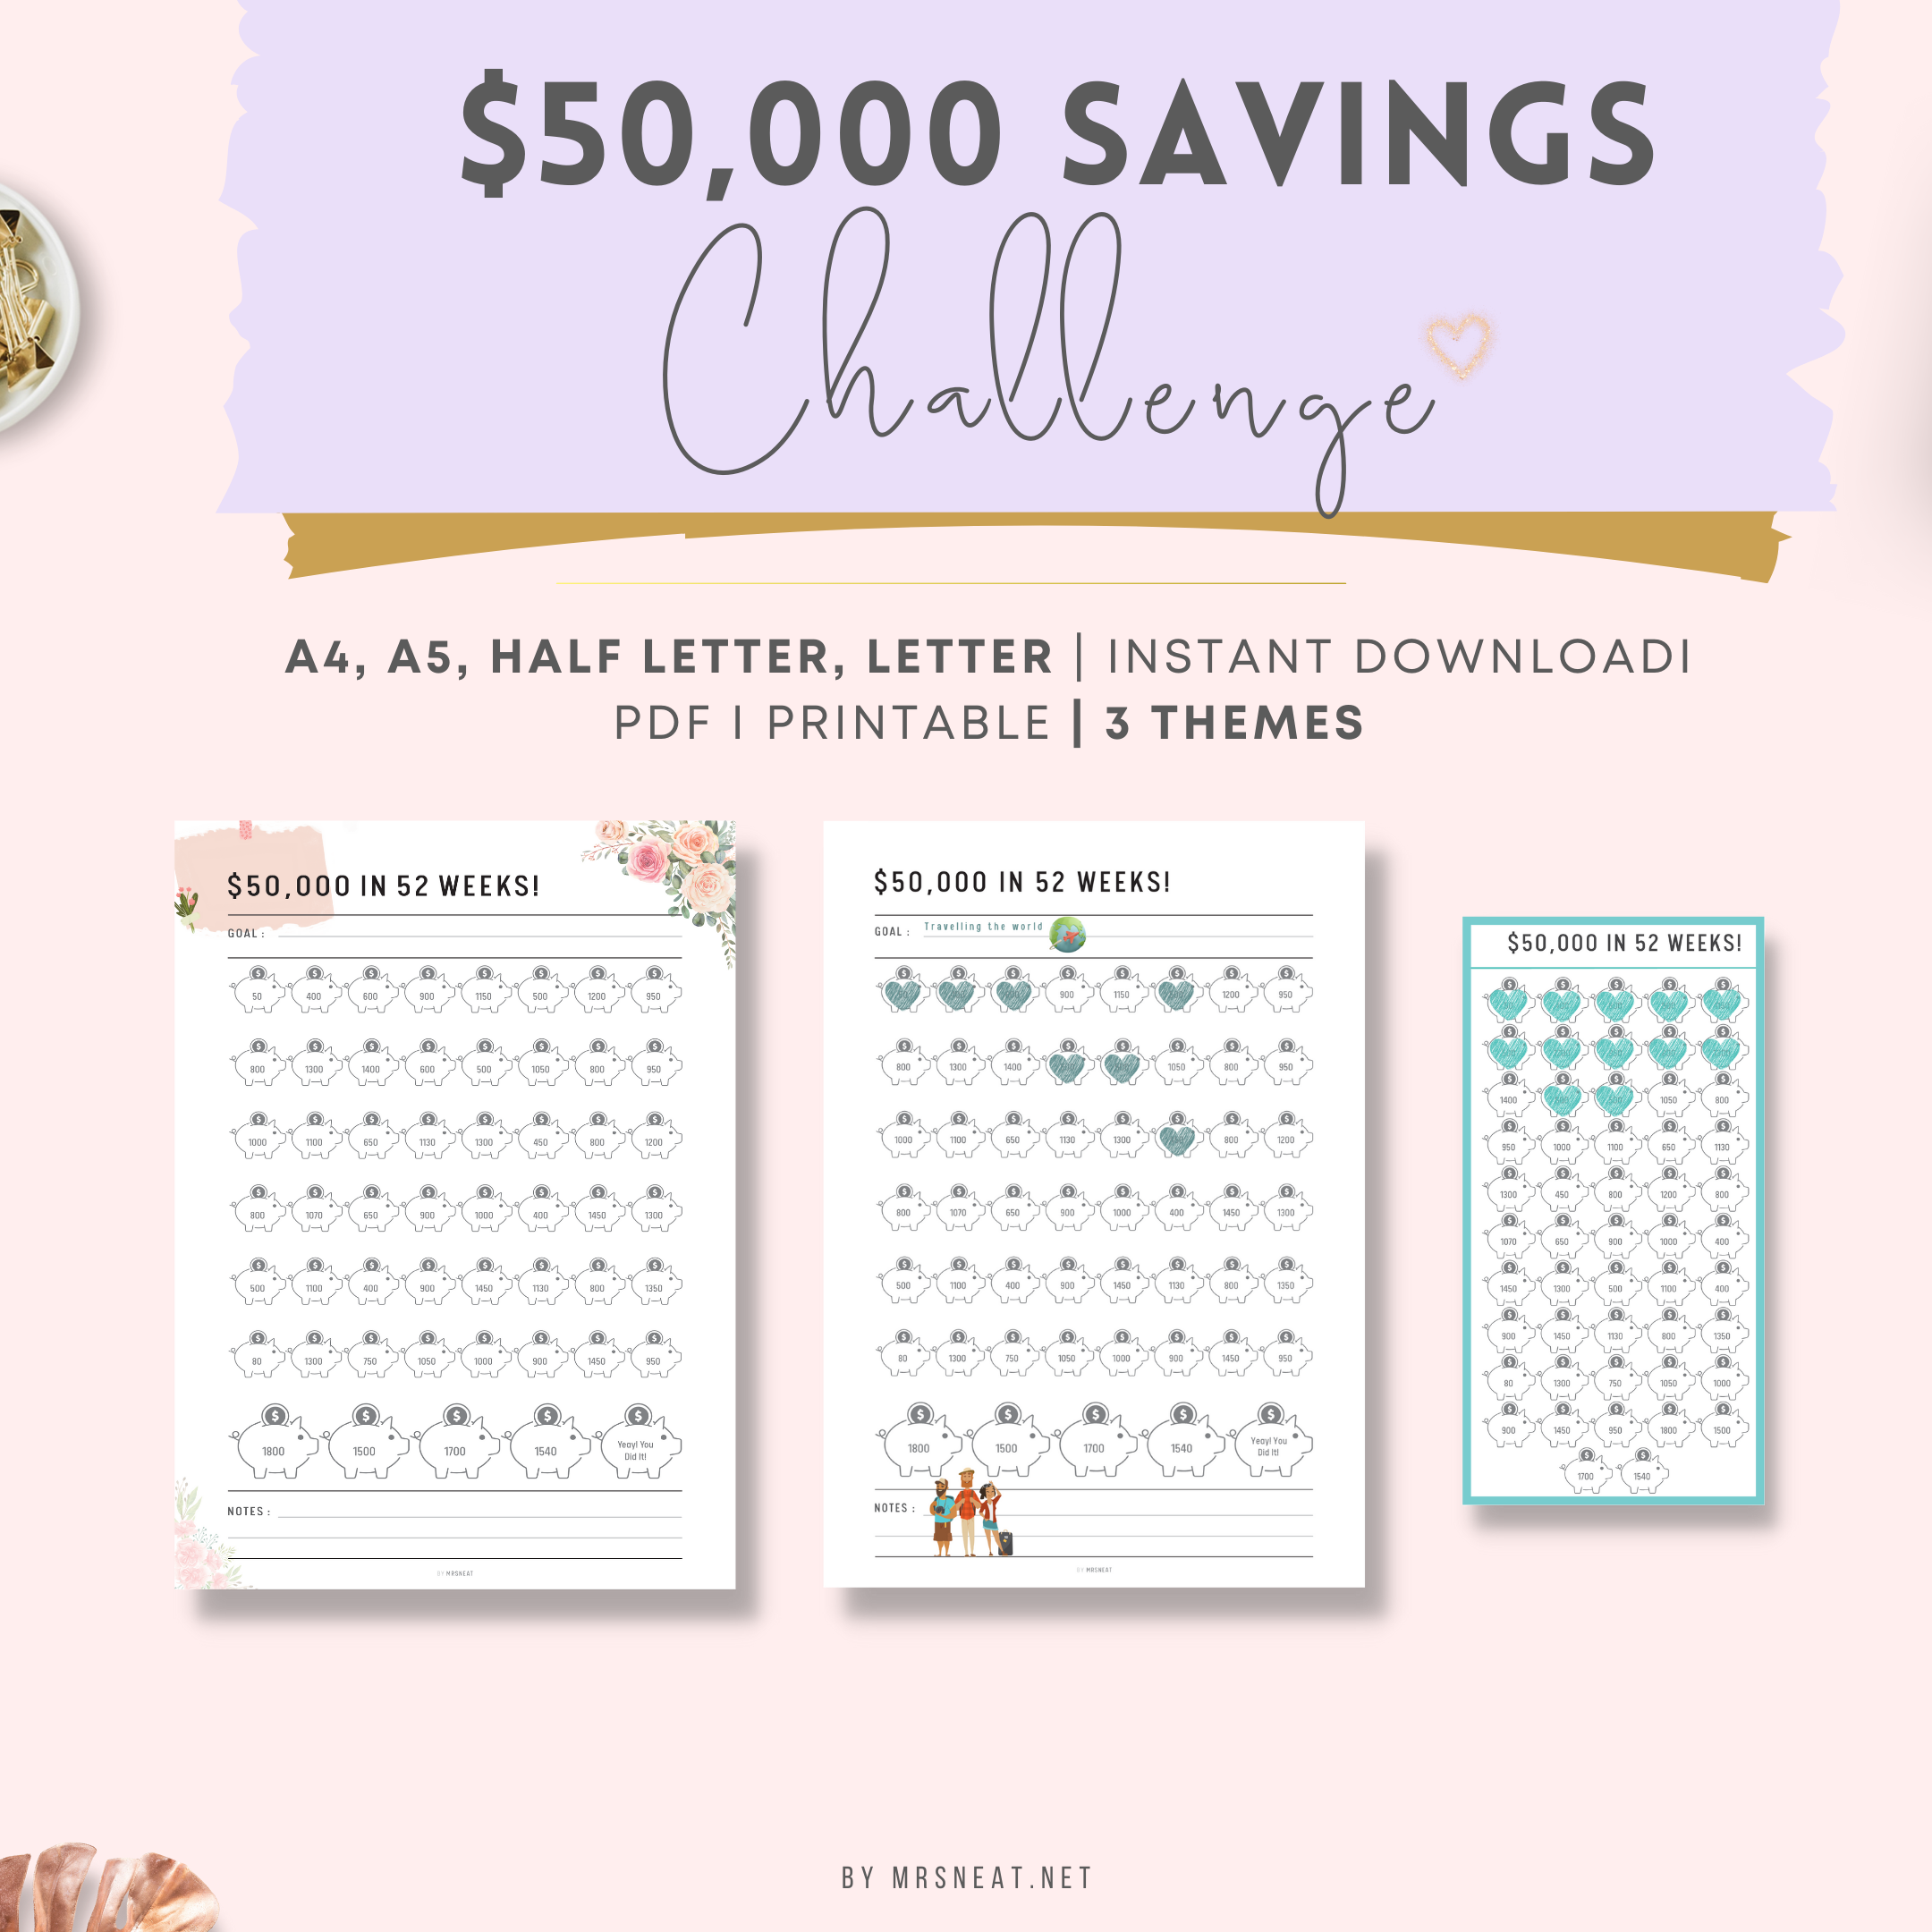 50K SAVINGS CHALLENGE In 1 Year, Money Saving Challenge, Savings Plan, Save  Money, 52 Week Challenge, 50K Savings, A4, US Letter -  Portugal